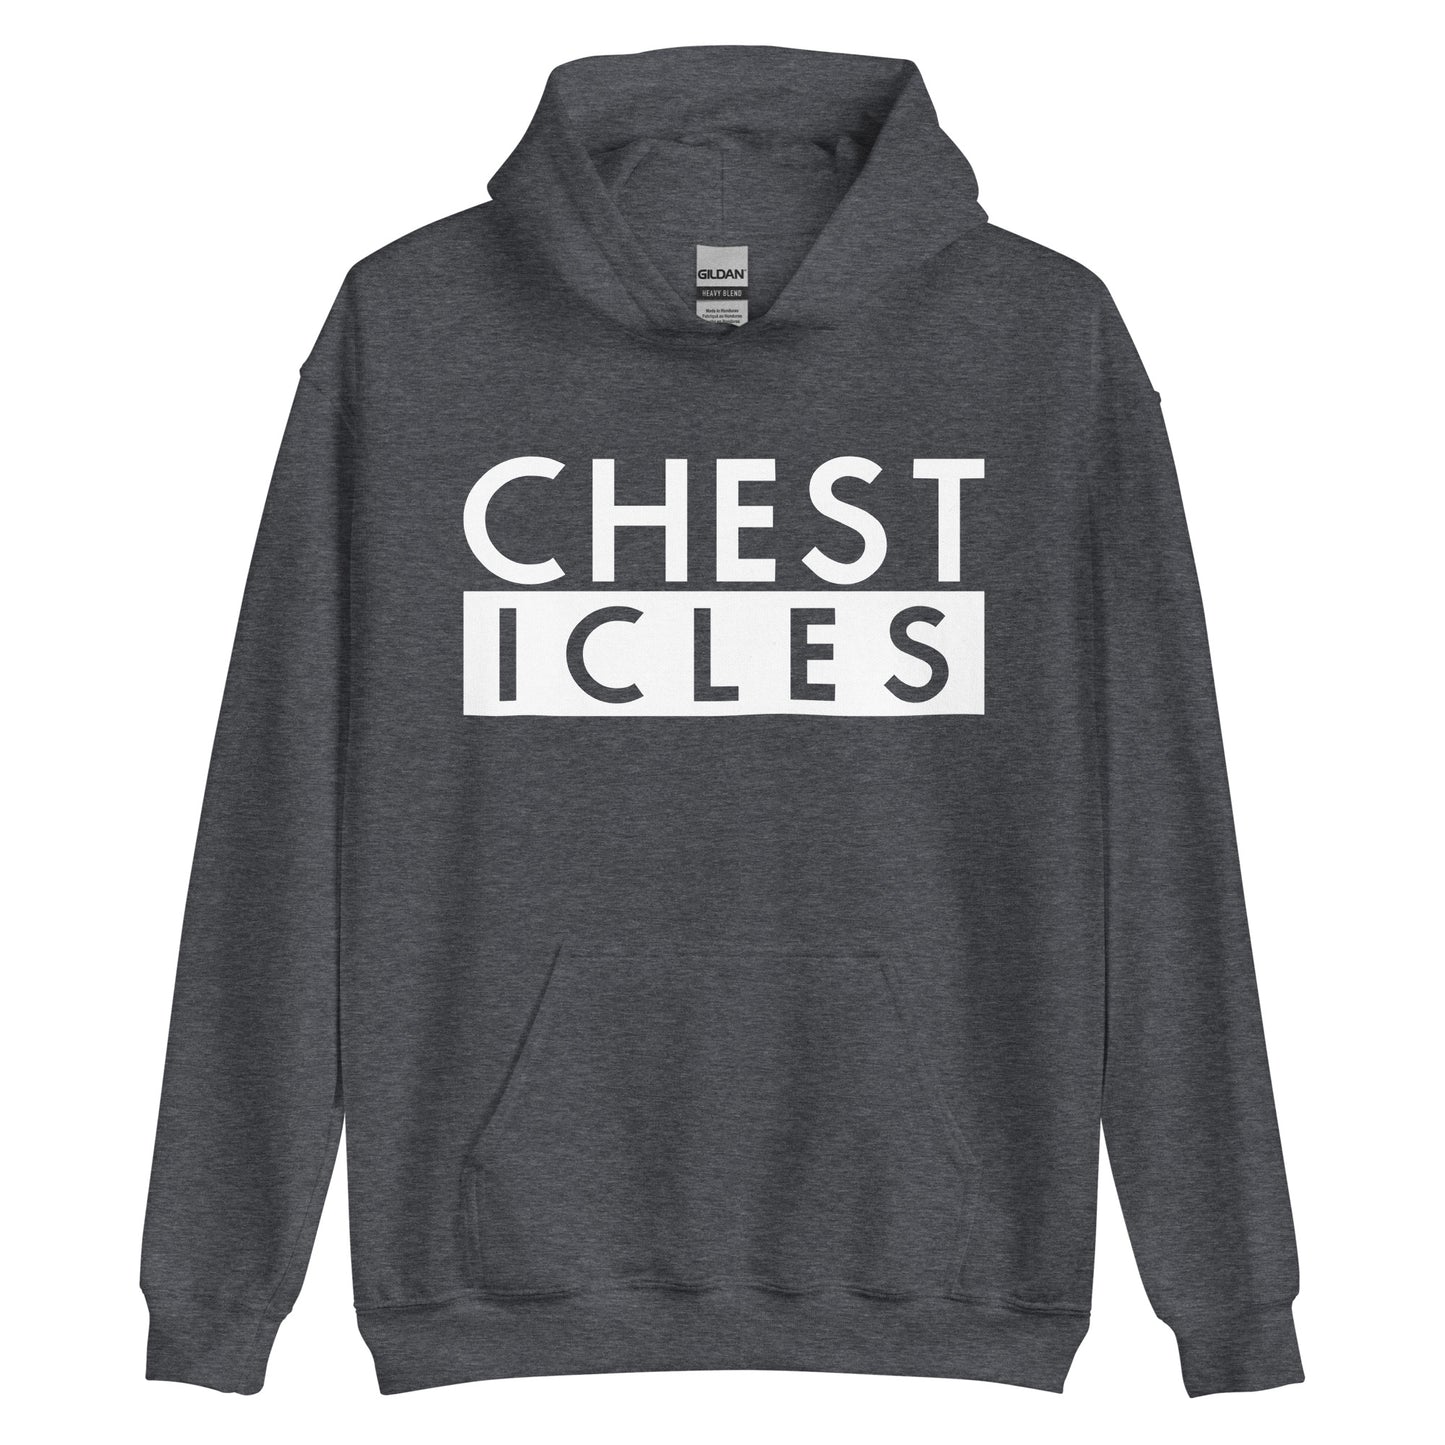 Chesticles Hoodie